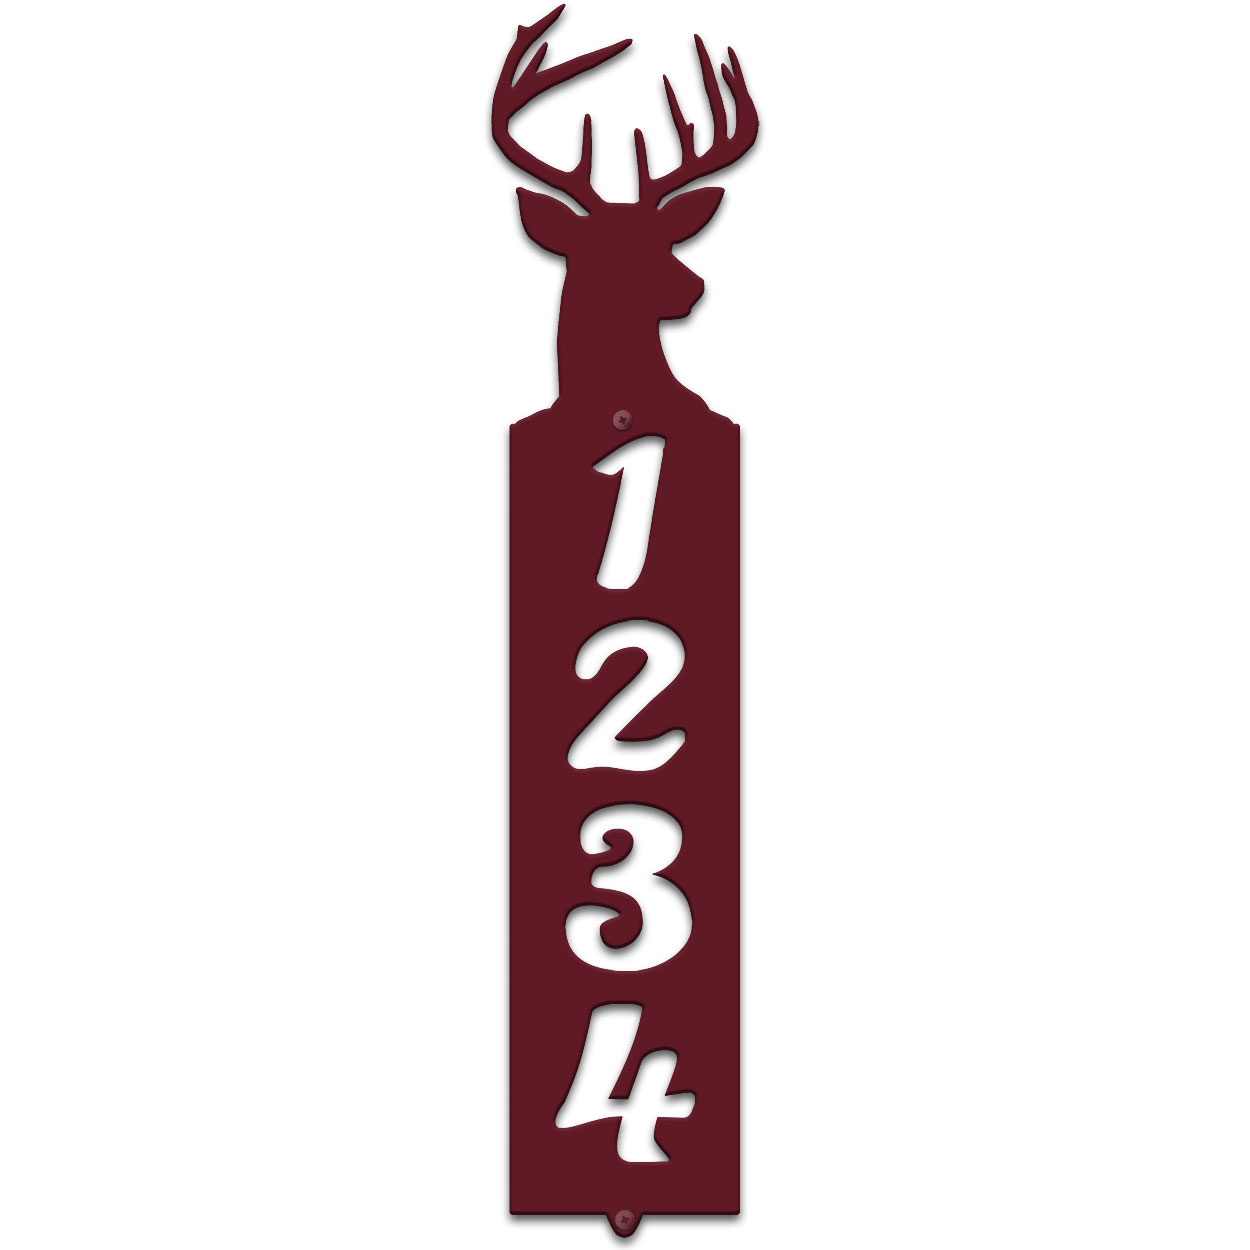 635134 - Deer Bust Cut-Outs Four Digit Address Number Plaque - Choose Size and Color